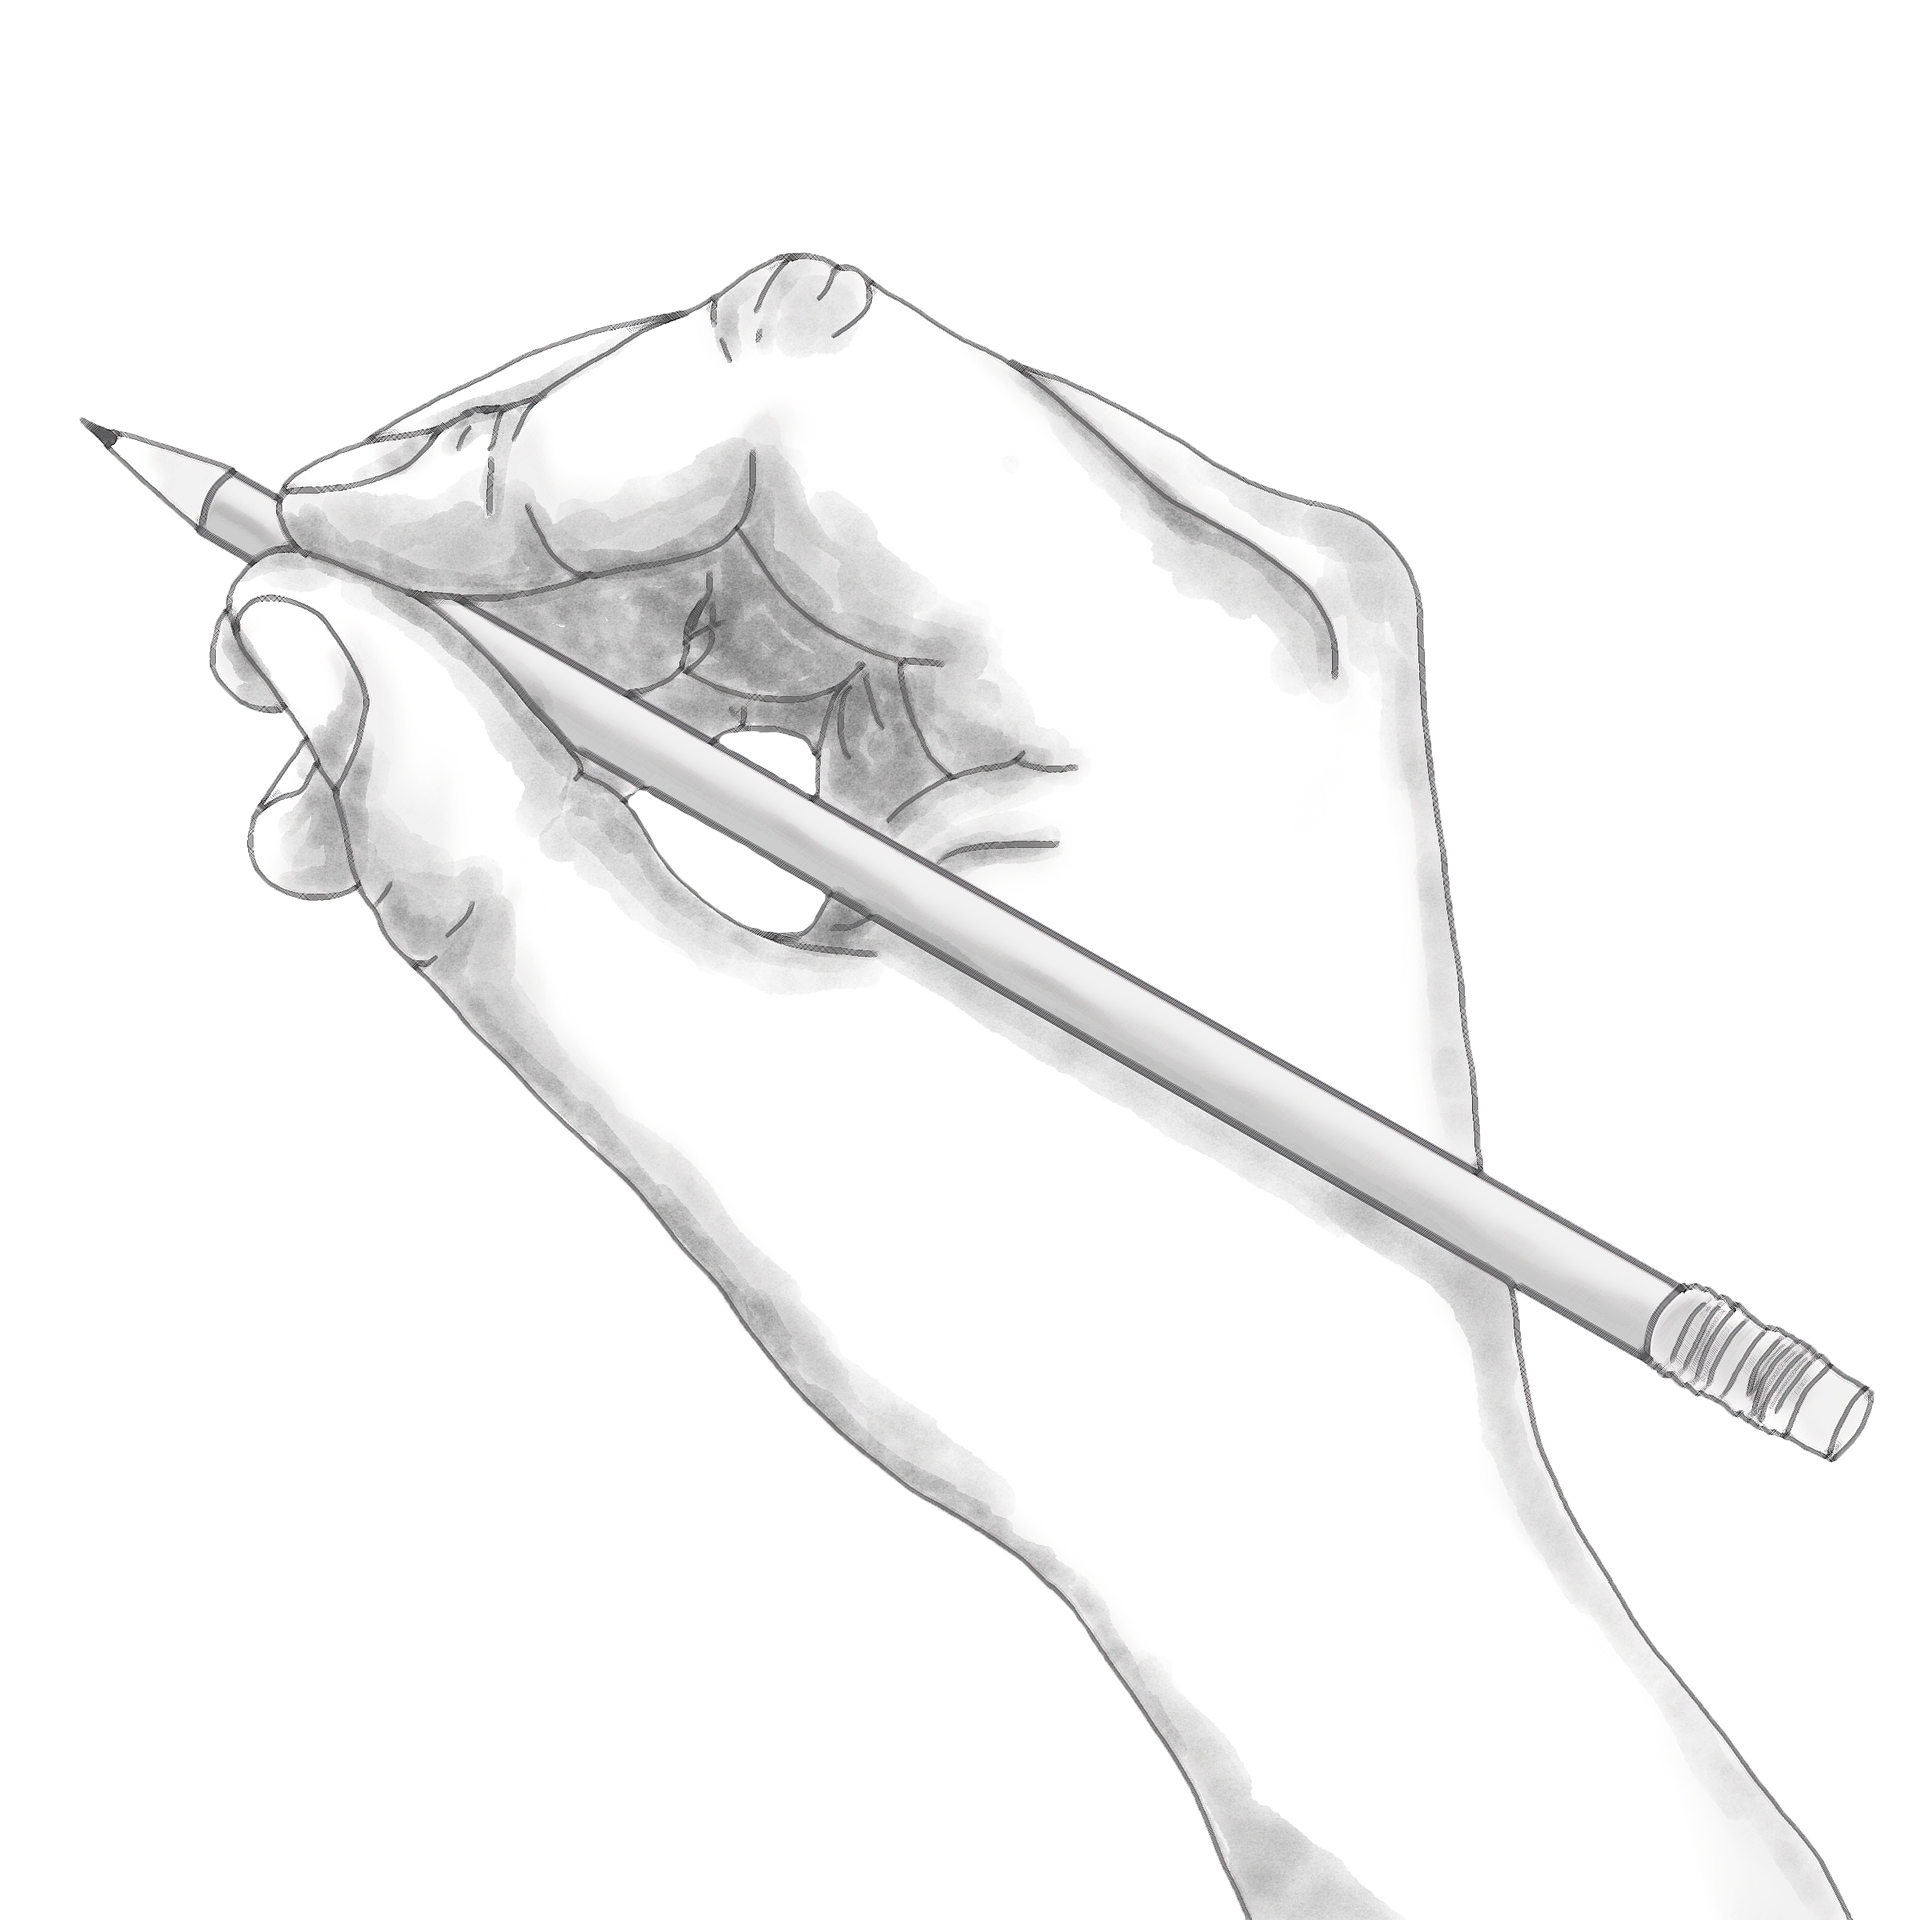 black and white line drawing of a hand holding a pencil